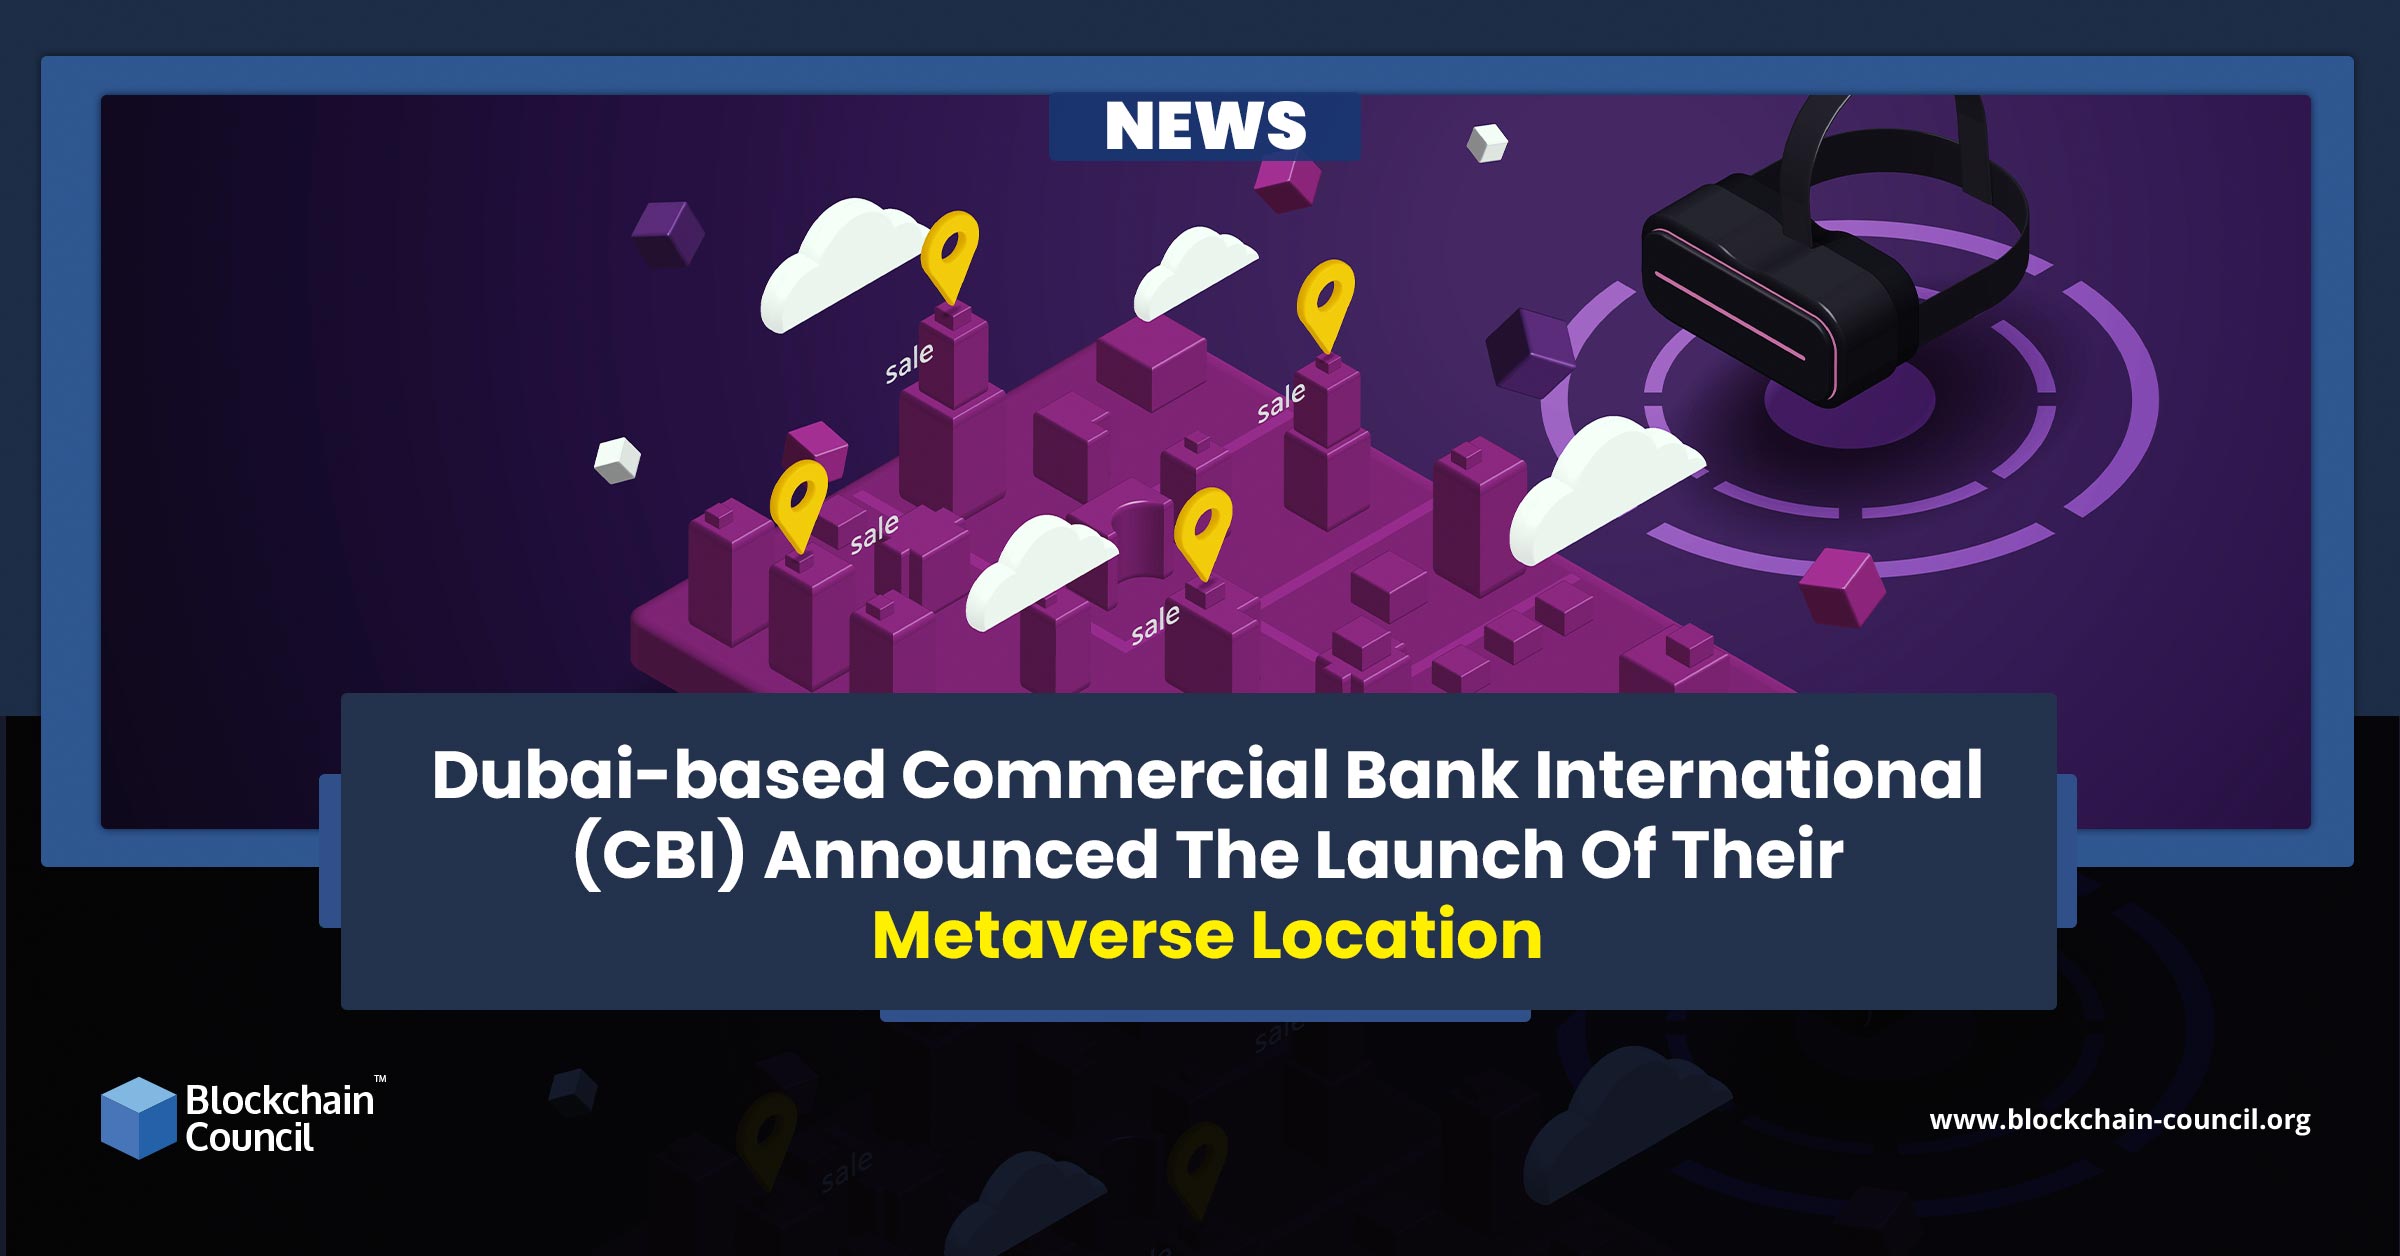 Dubai-based Commercial Bank International (CBI) Announced The Launch Of Their Metaverse Location